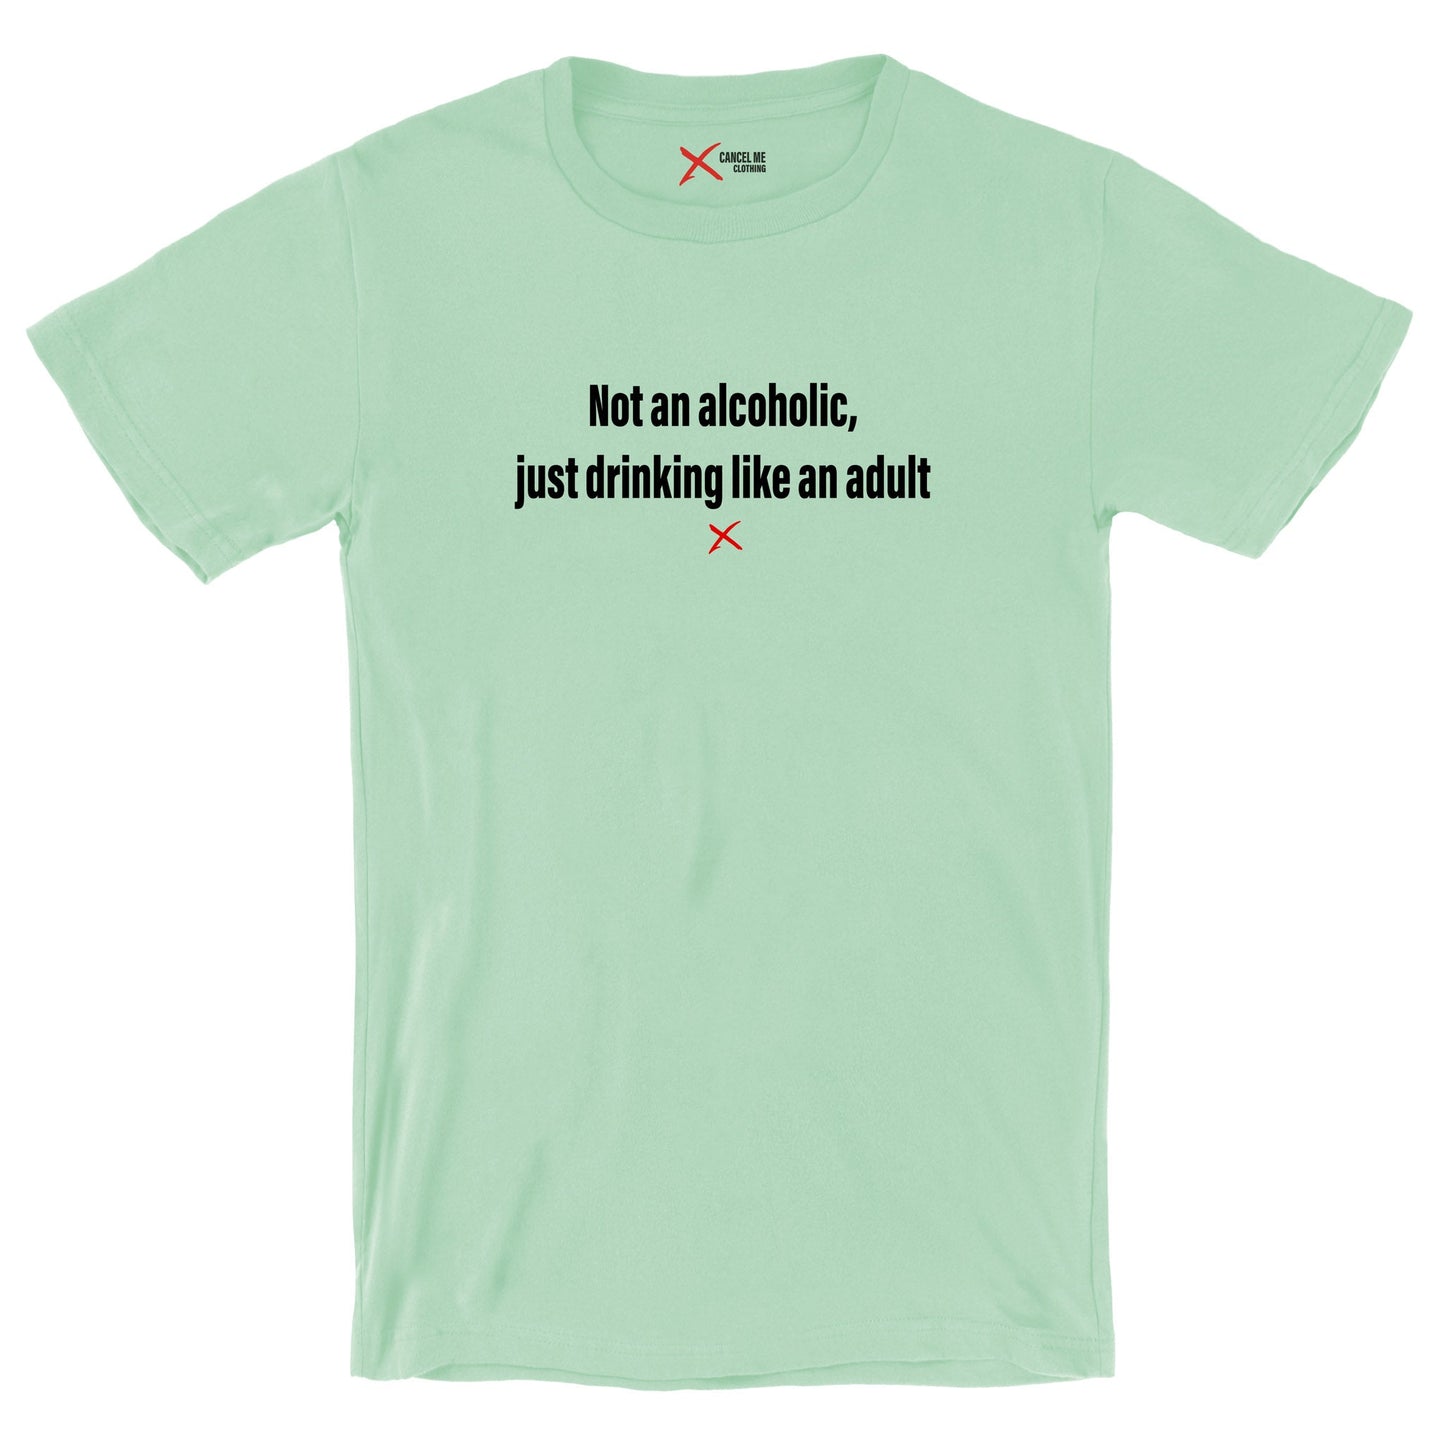 Not an alcoholic, just drinking like an adult - Shirt